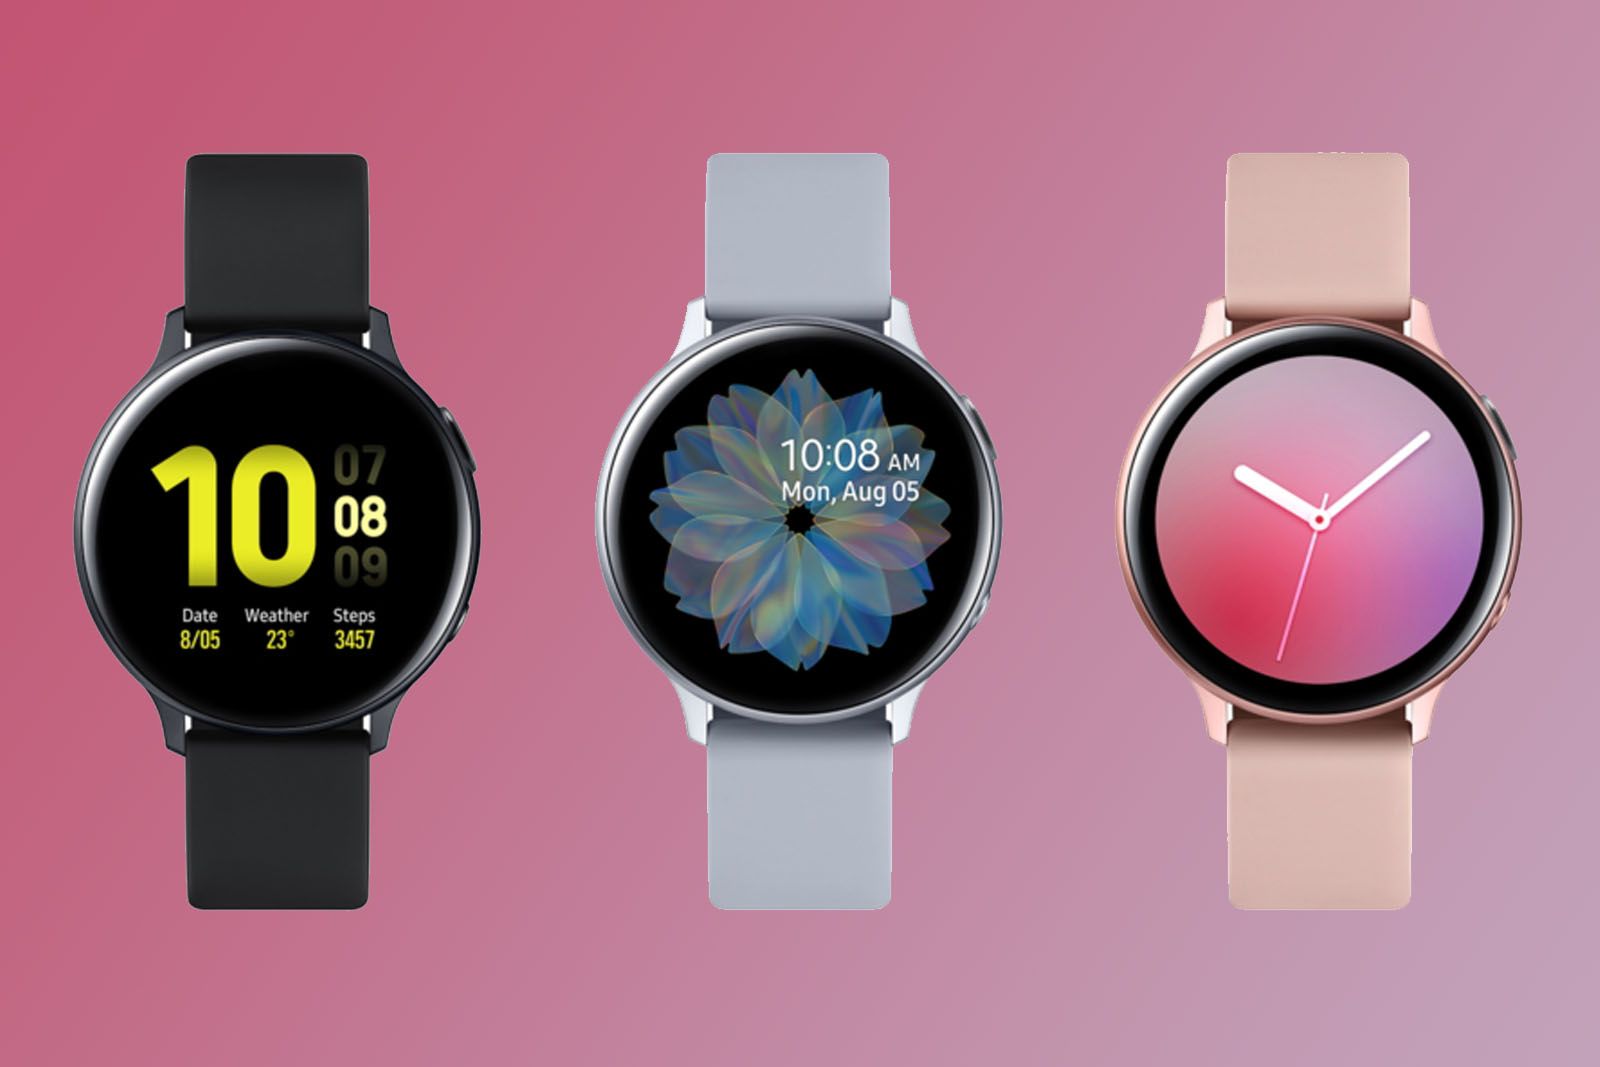 Samsung Galaxy Watch Active 2 ECG and Fall Detection features coming to US in Q1 of 2020 image 1